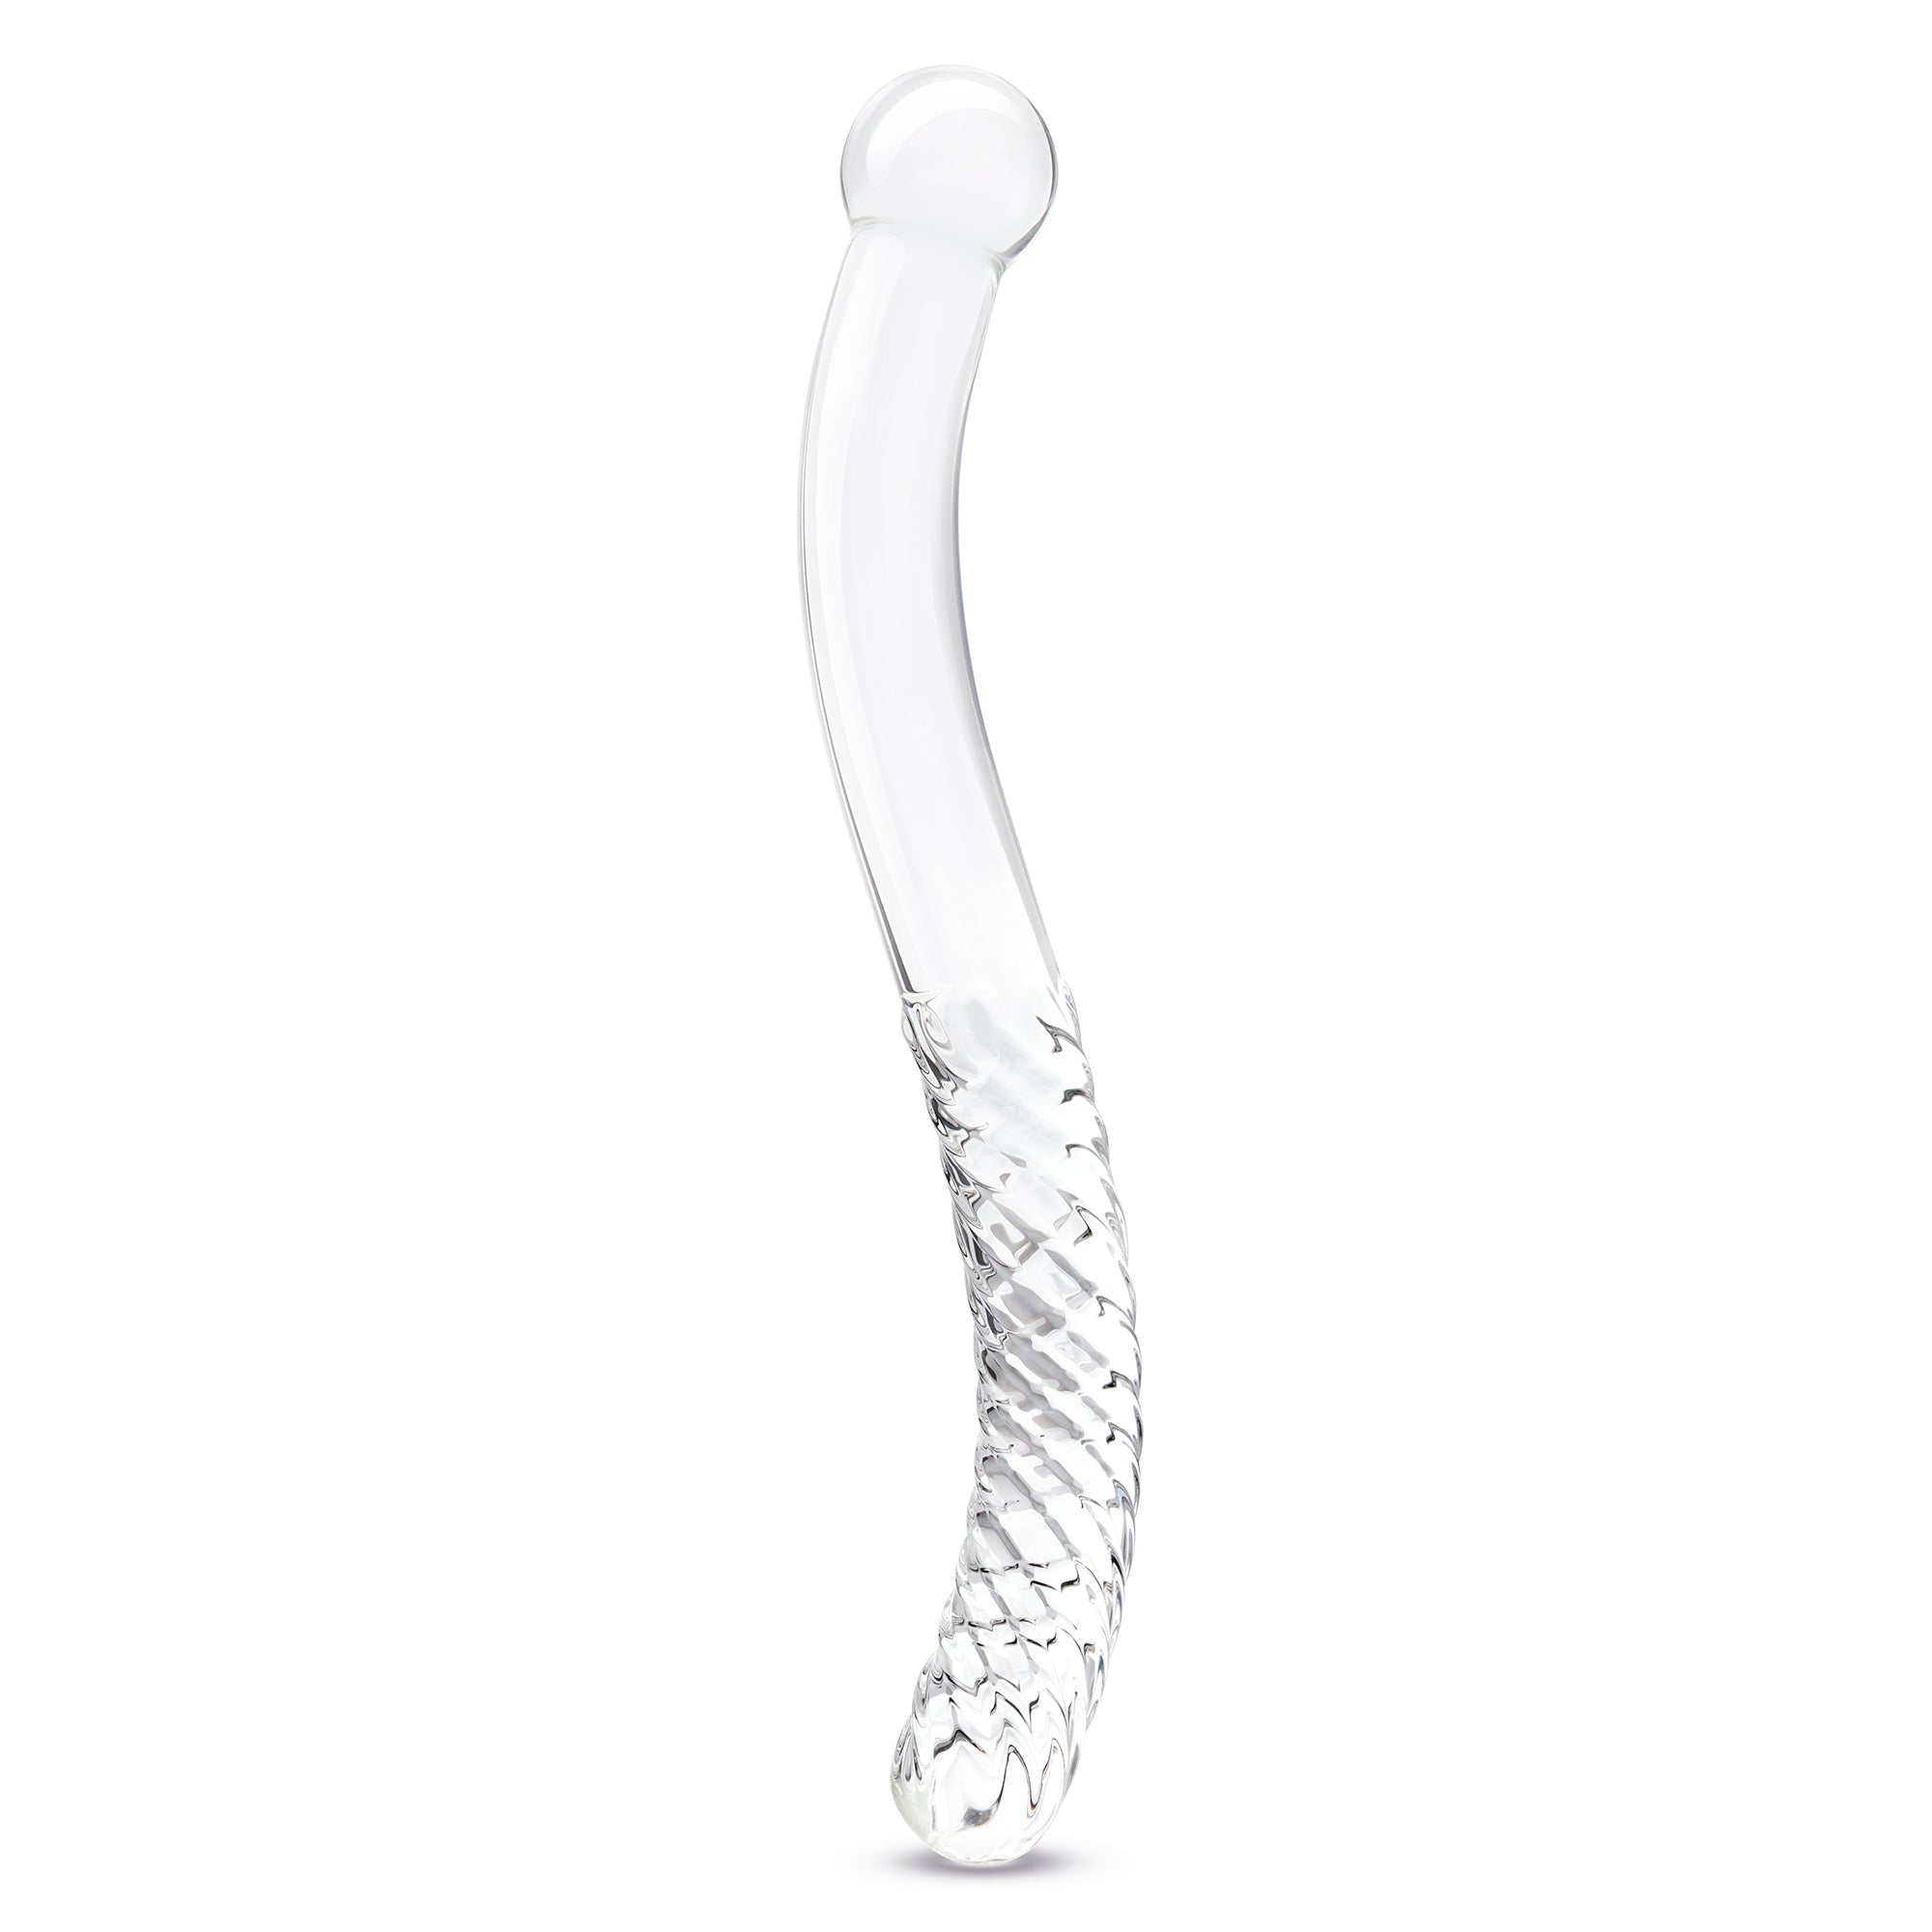 11" Glass Pelvic Wand Double Ended